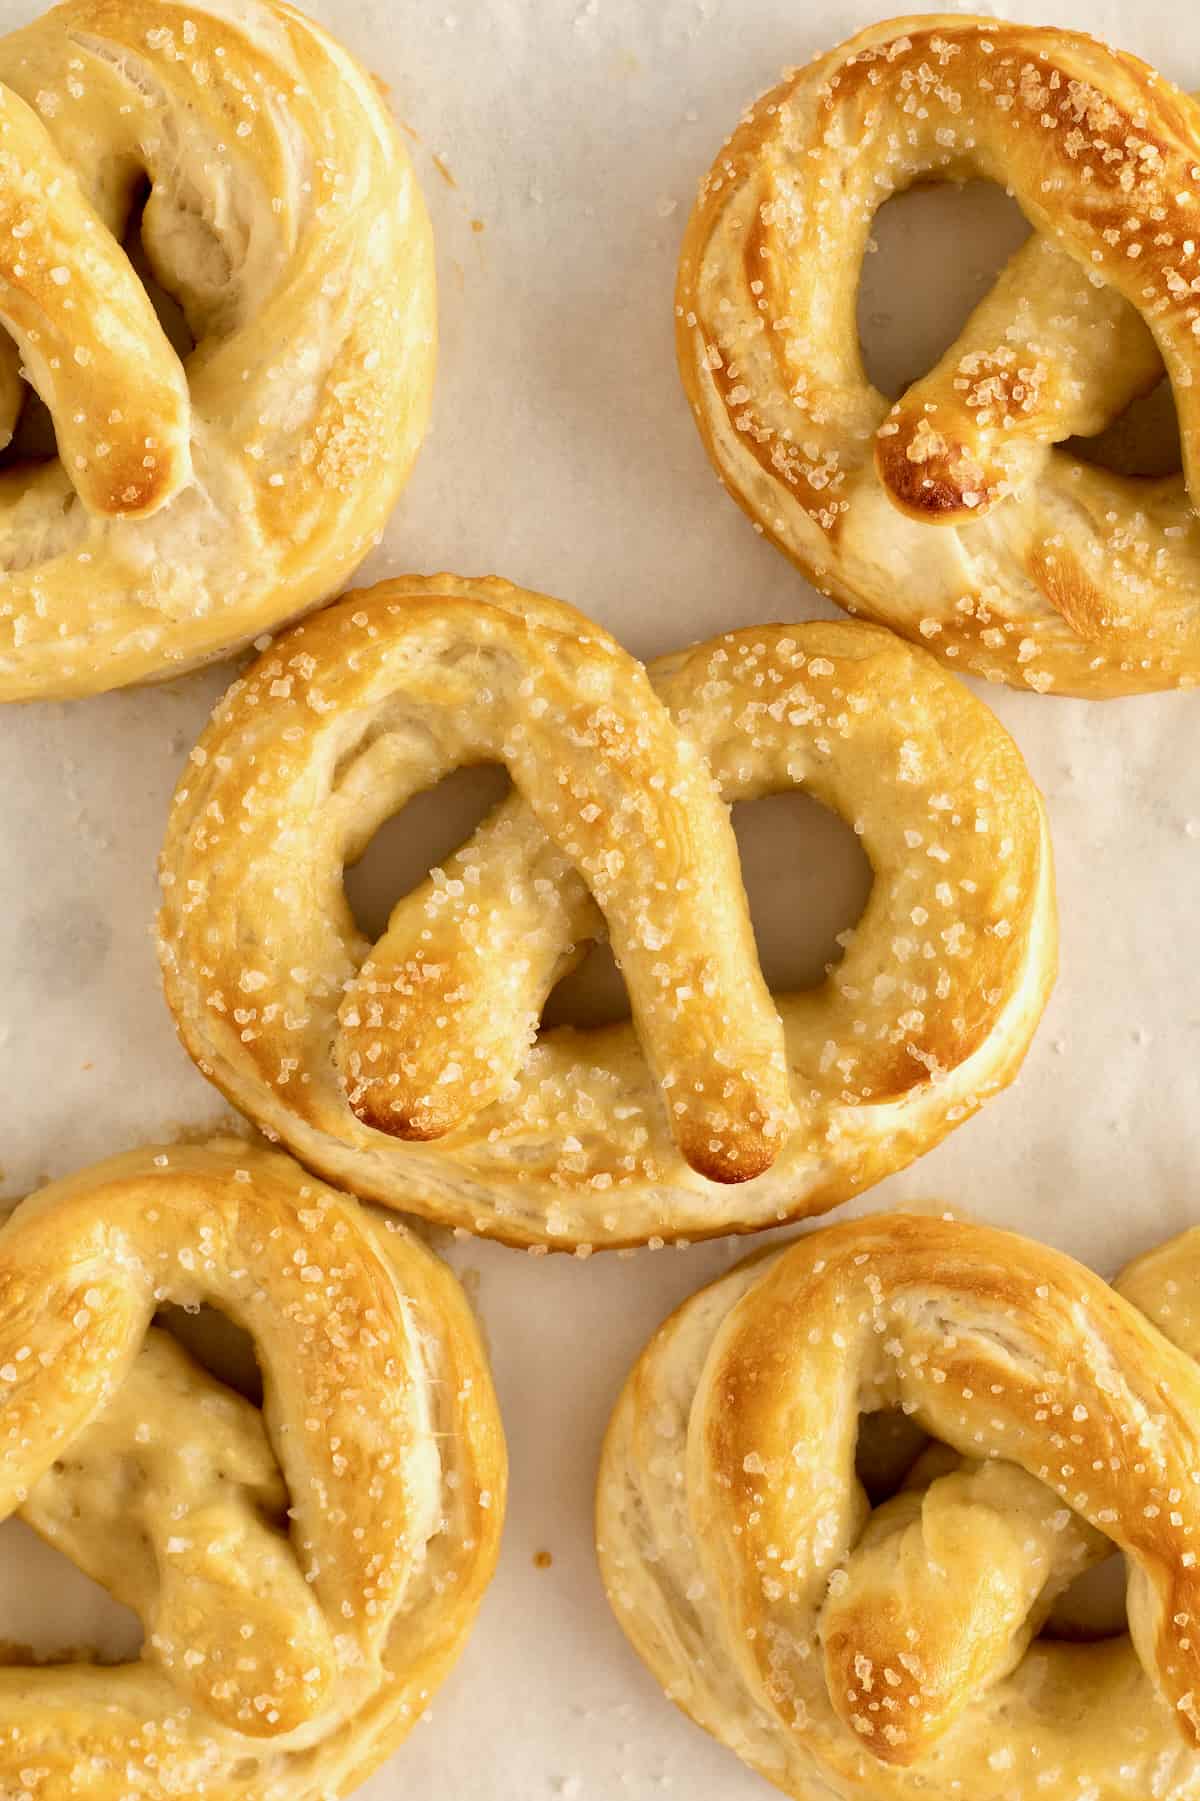 A close up of five homemade pretzels on a sheet of parchment paper.